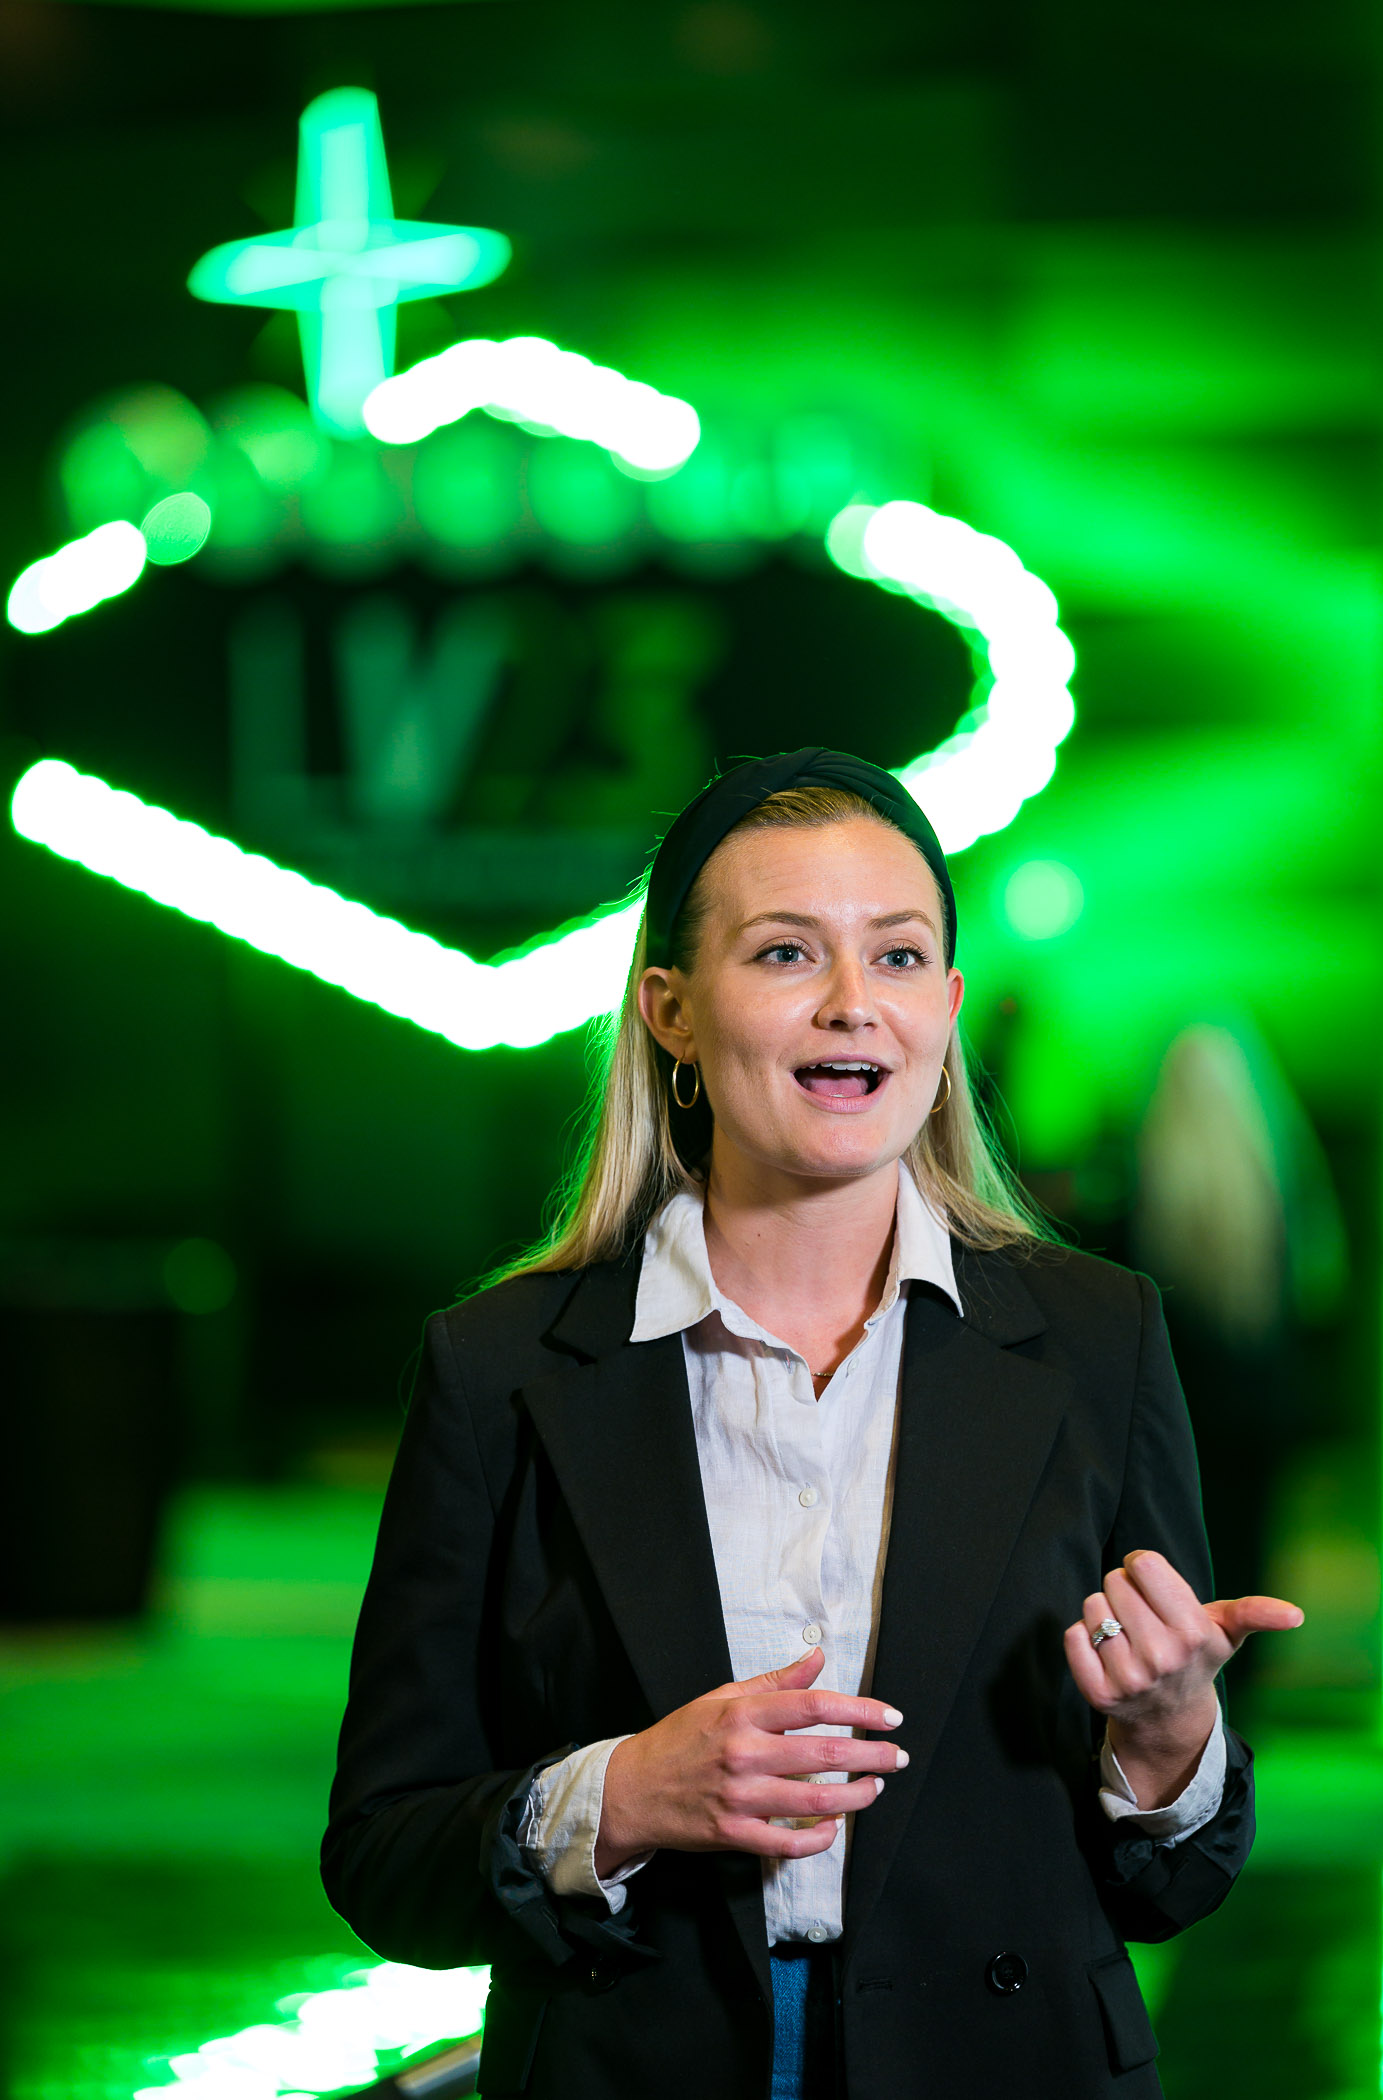 Woman in front of green neon sign